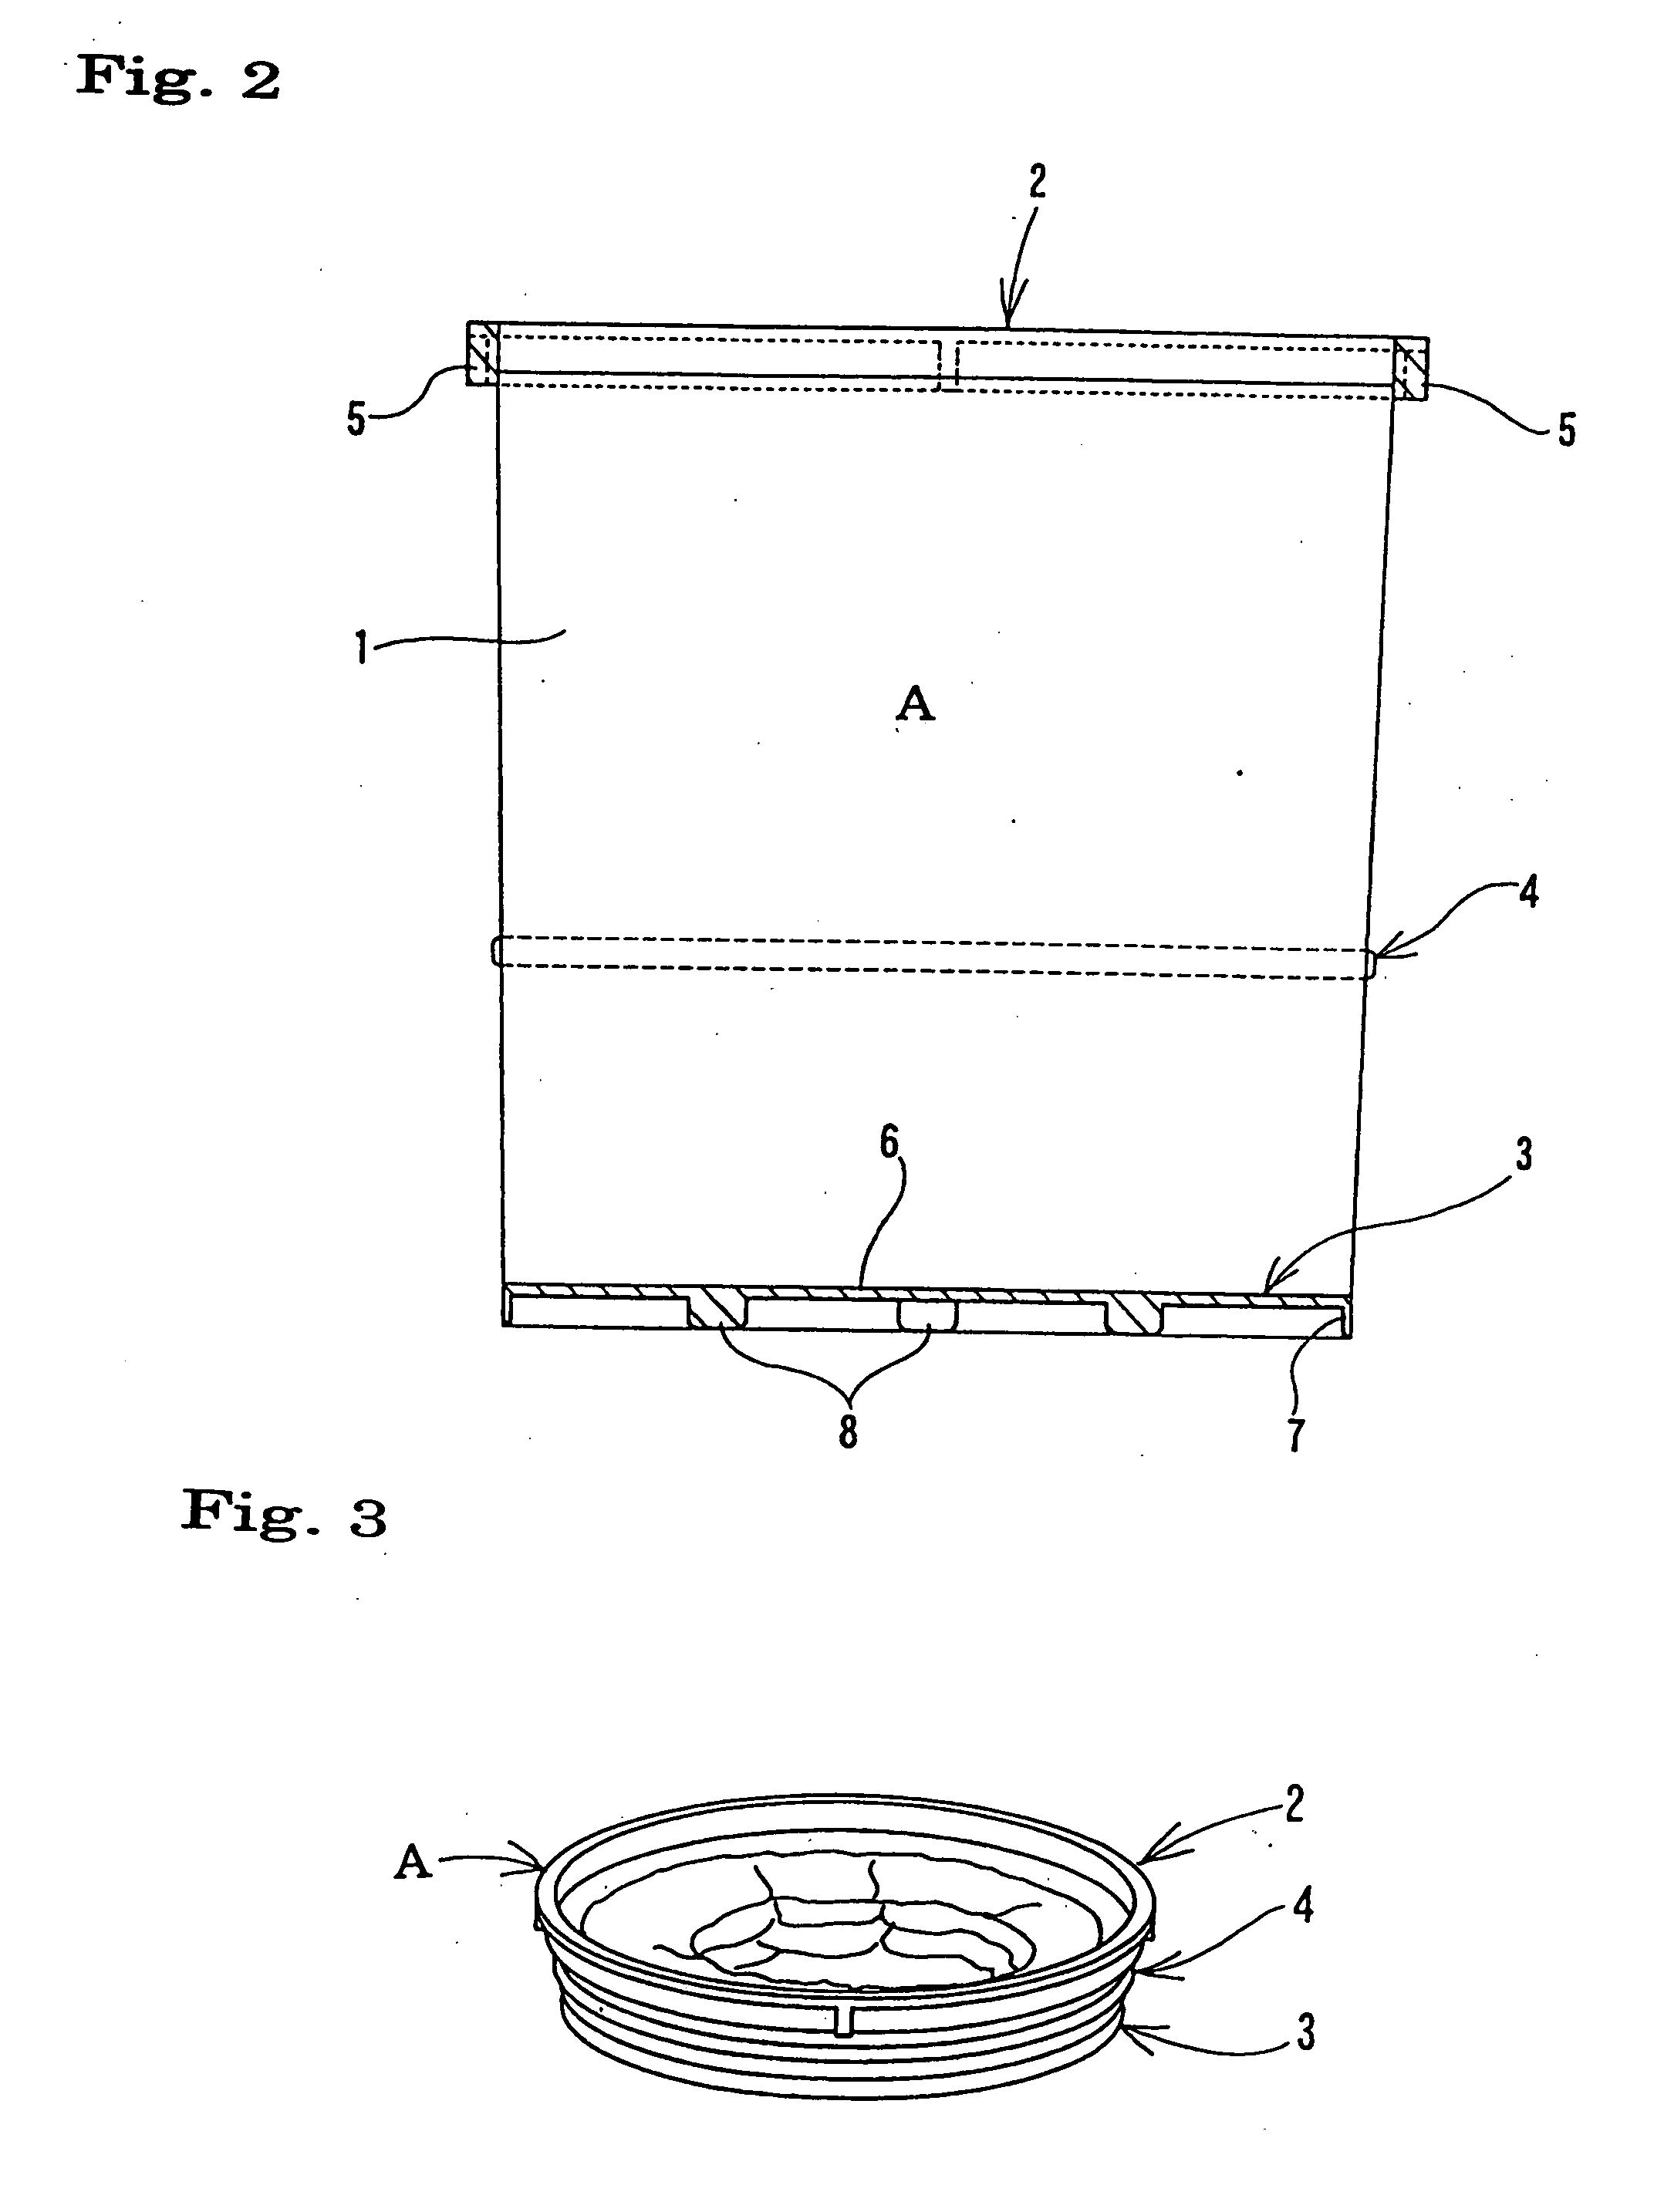 Holding container, external container for kneading and transportation, and transporting the container and kneader